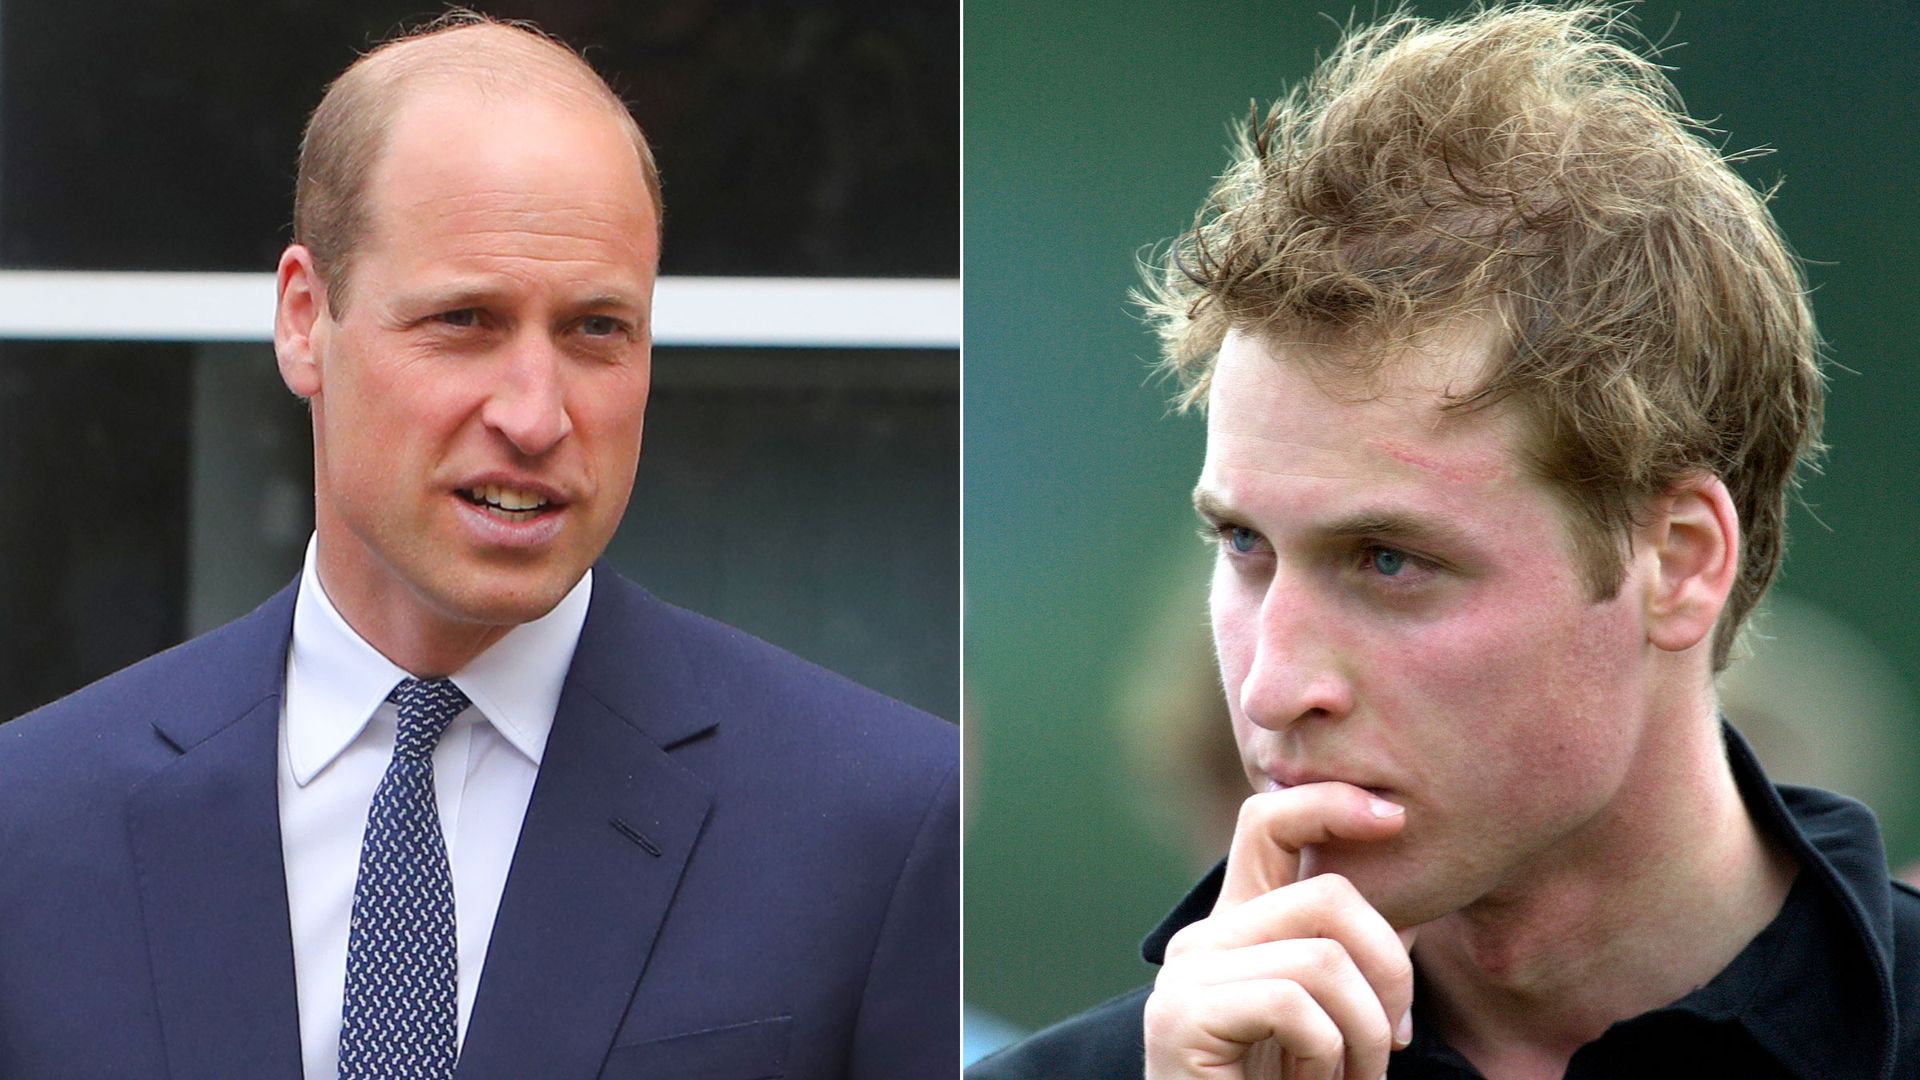 Prince William in Wales and with scar visible 